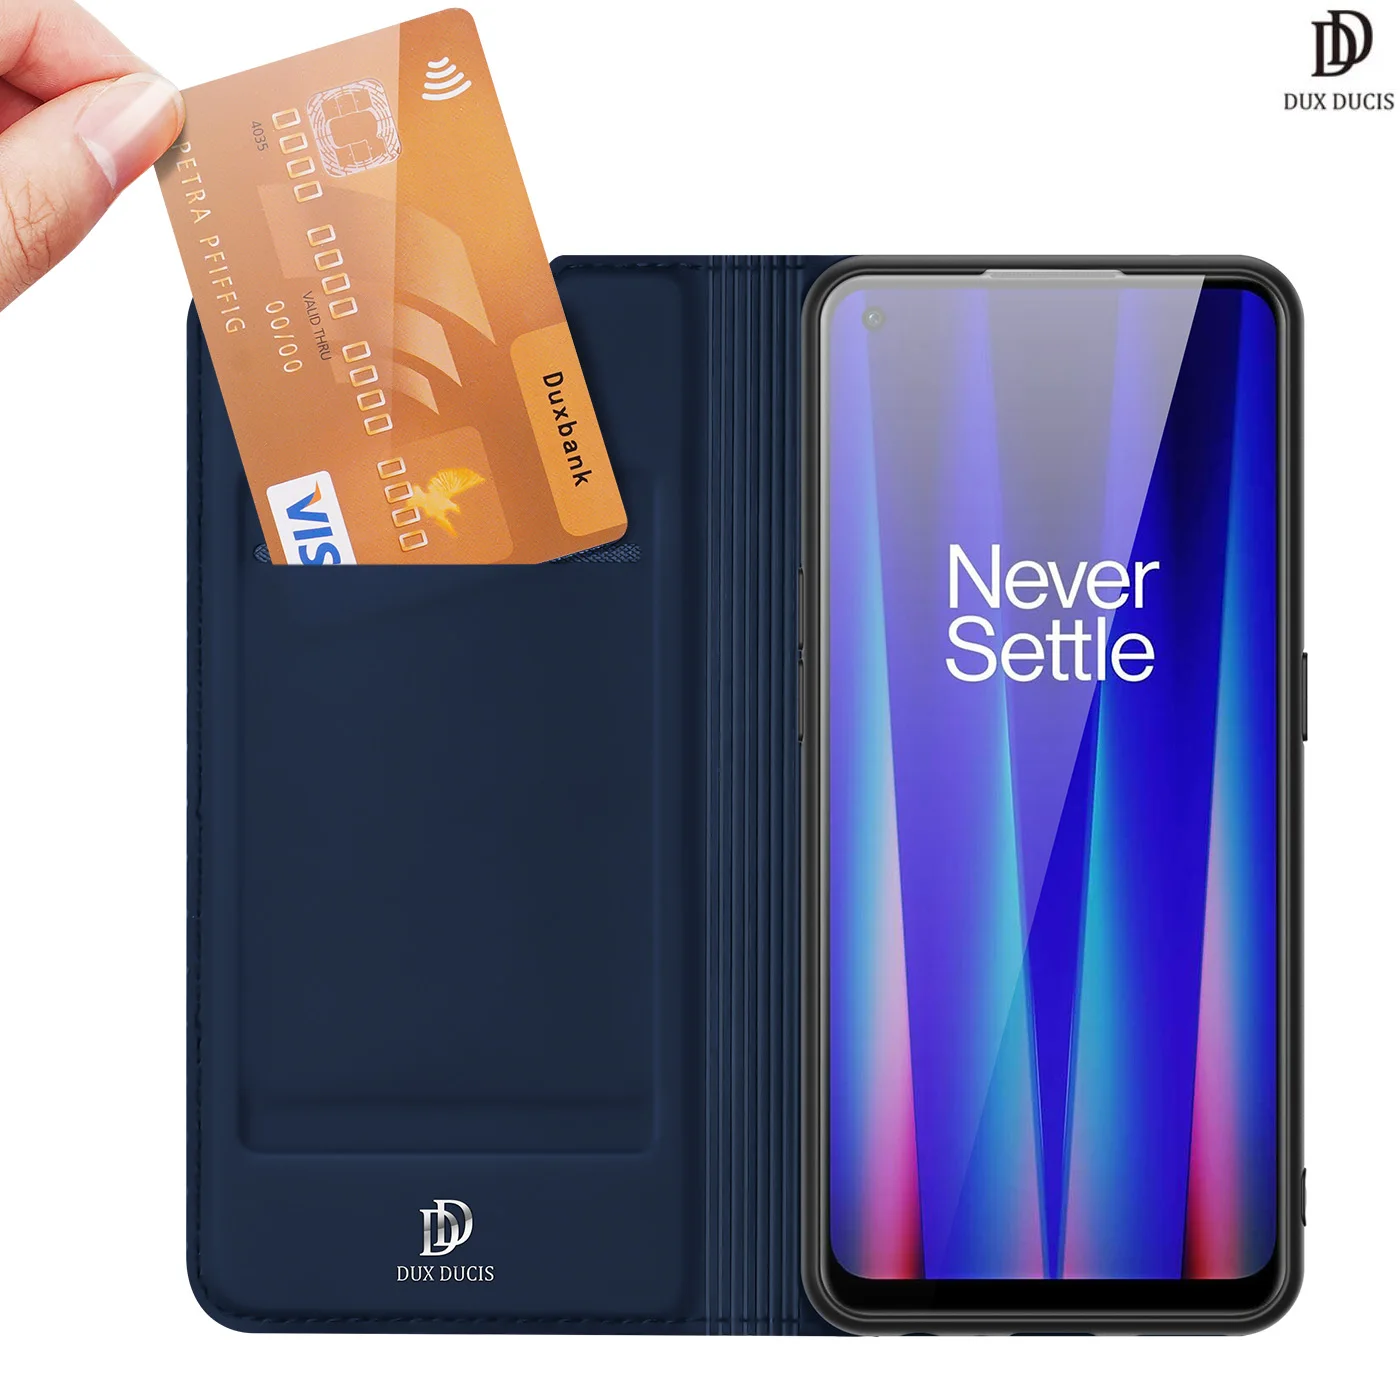 

Case For OnePlus Nord CE 2 5G DUX DUCIS Skin Pro Series Leather Wallet Flip Case Full Protection Steady Stand Magnetic Closure